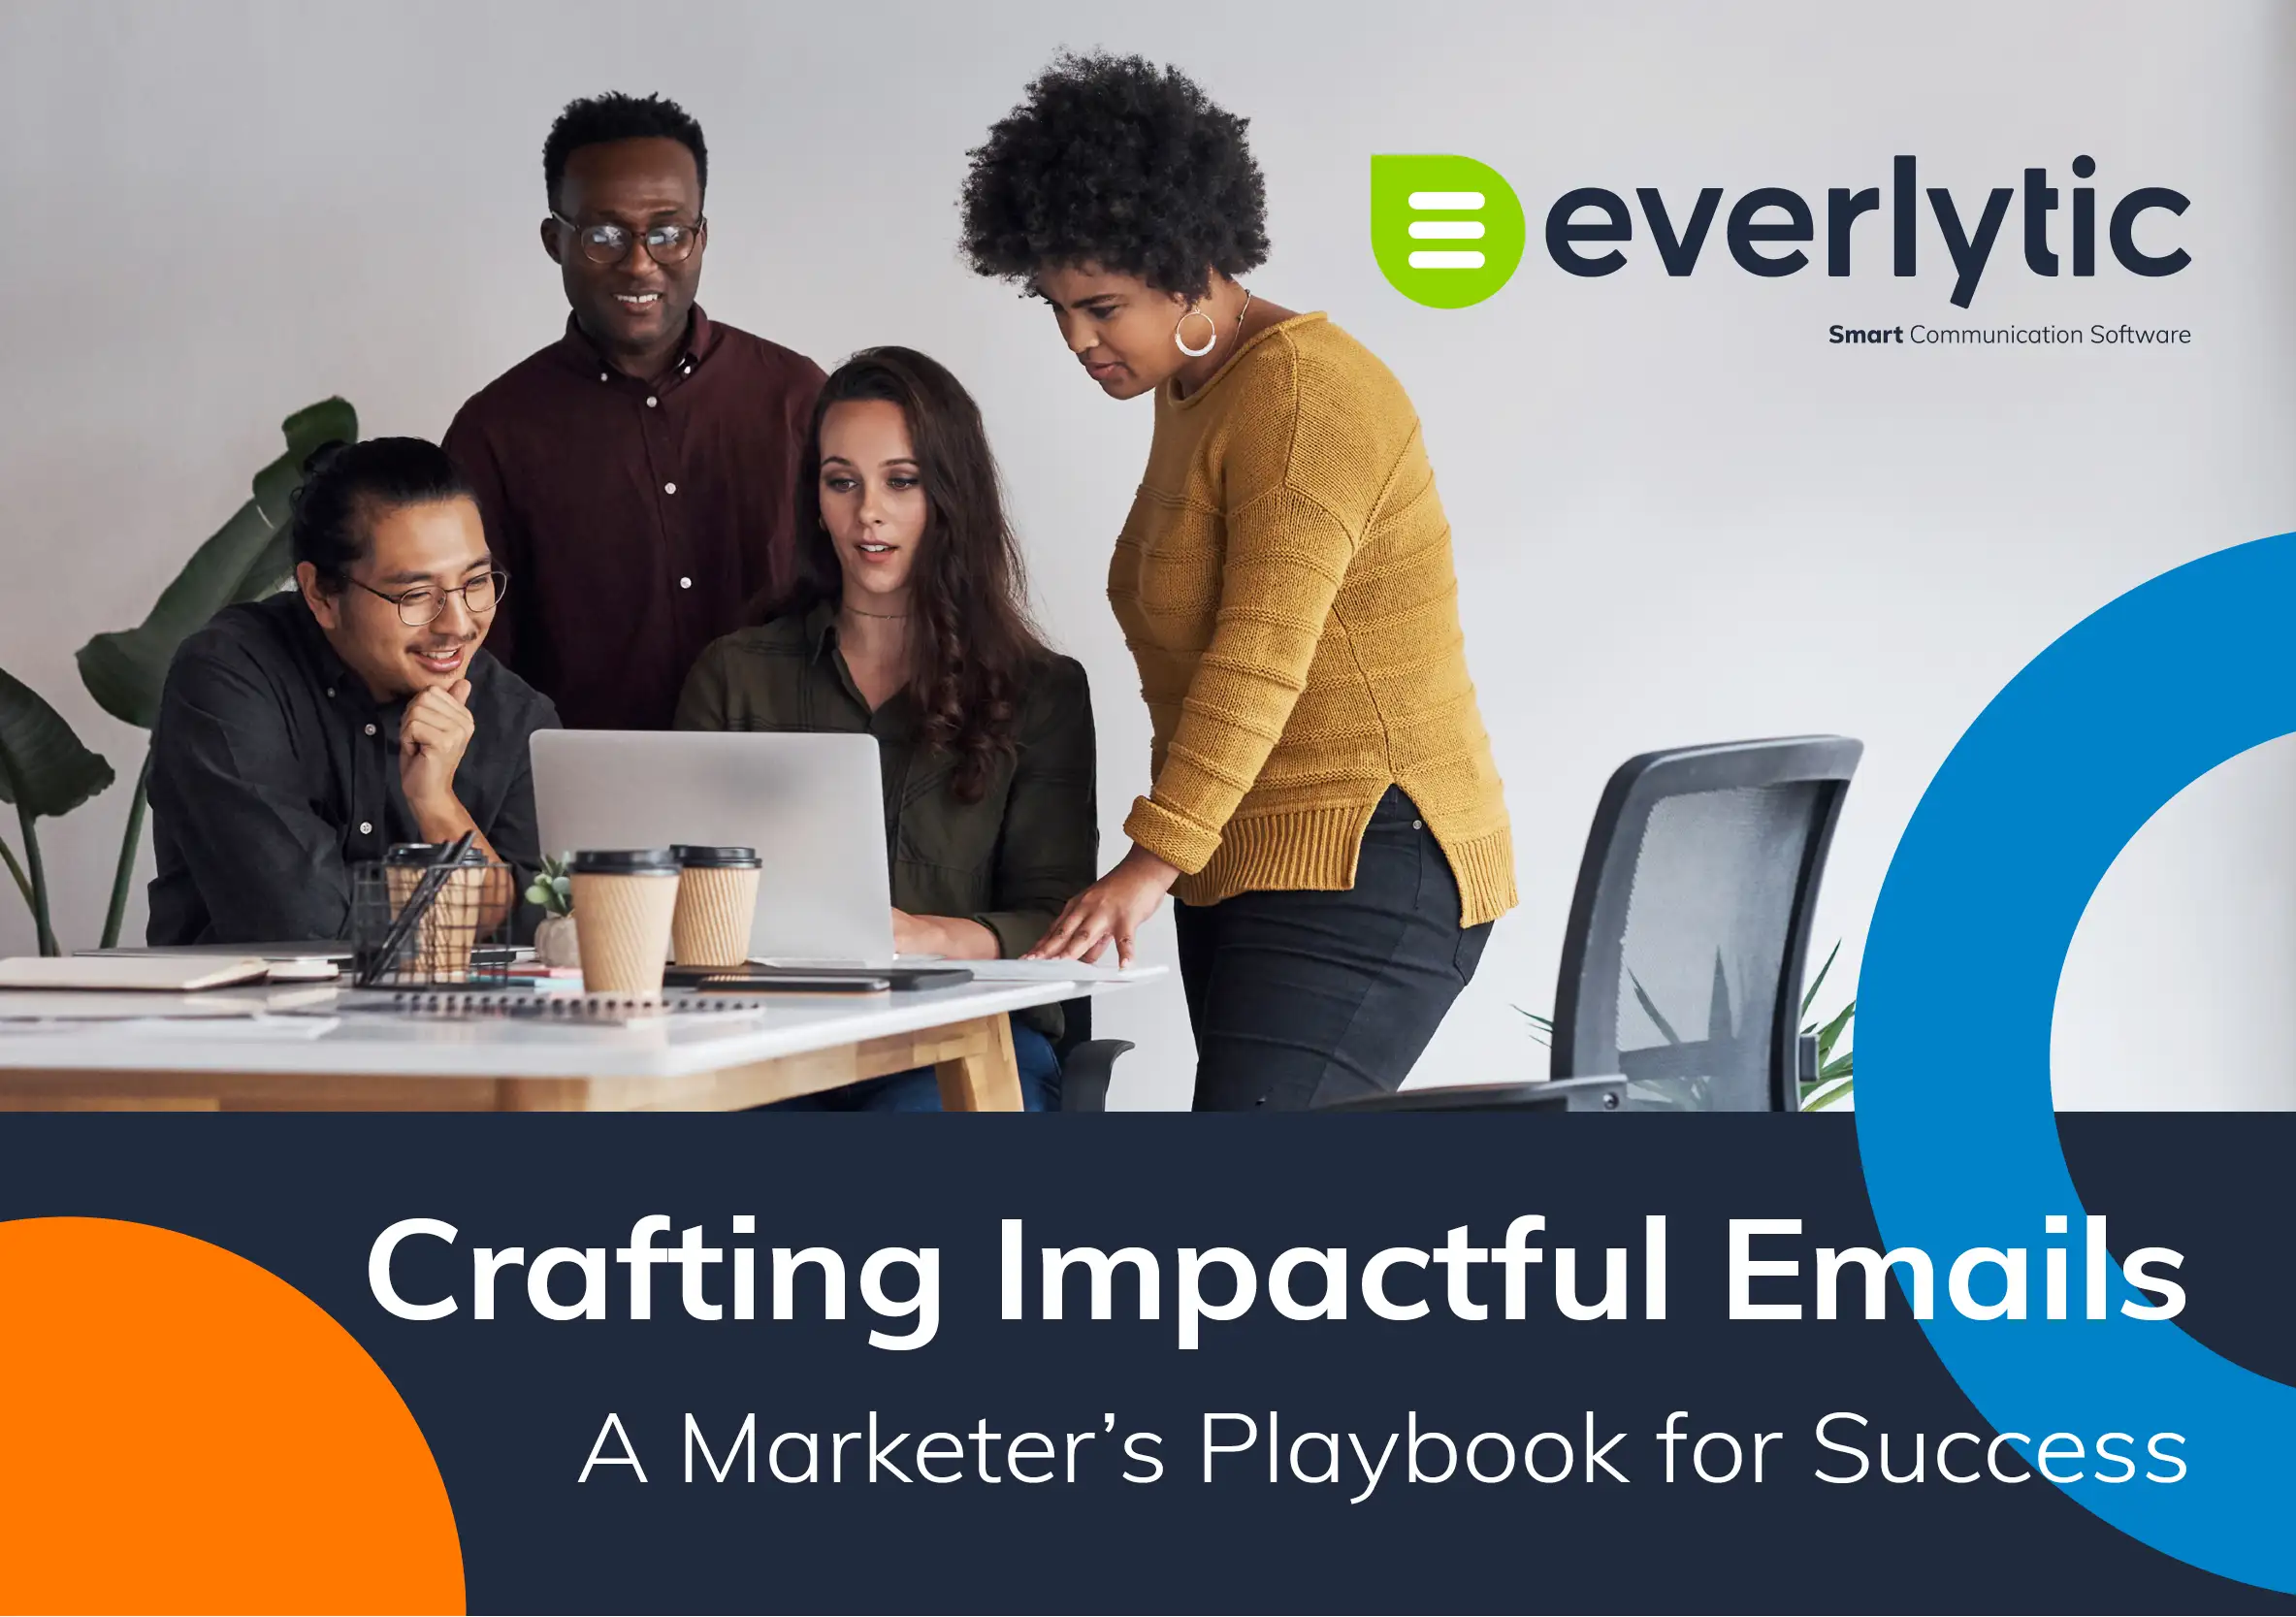 Crafting Impactful Emails A Marketers Playbook for Success | Everlytic | Crafting Impactful Emails: A Marketer’s Playbook for Success